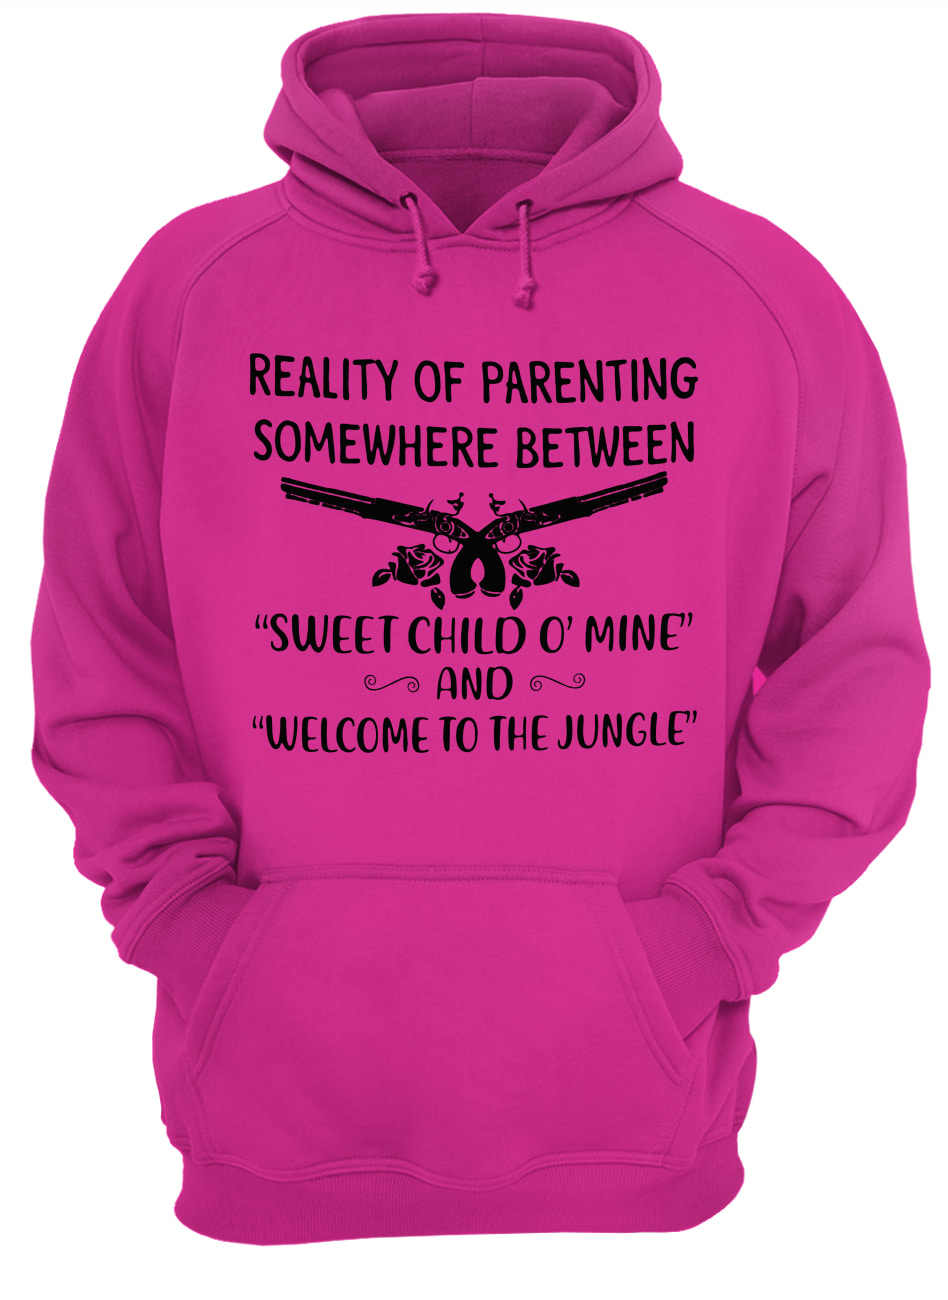 Reality of parenting somewhere between sweet child o' mine and welcome to the jungle hoodie